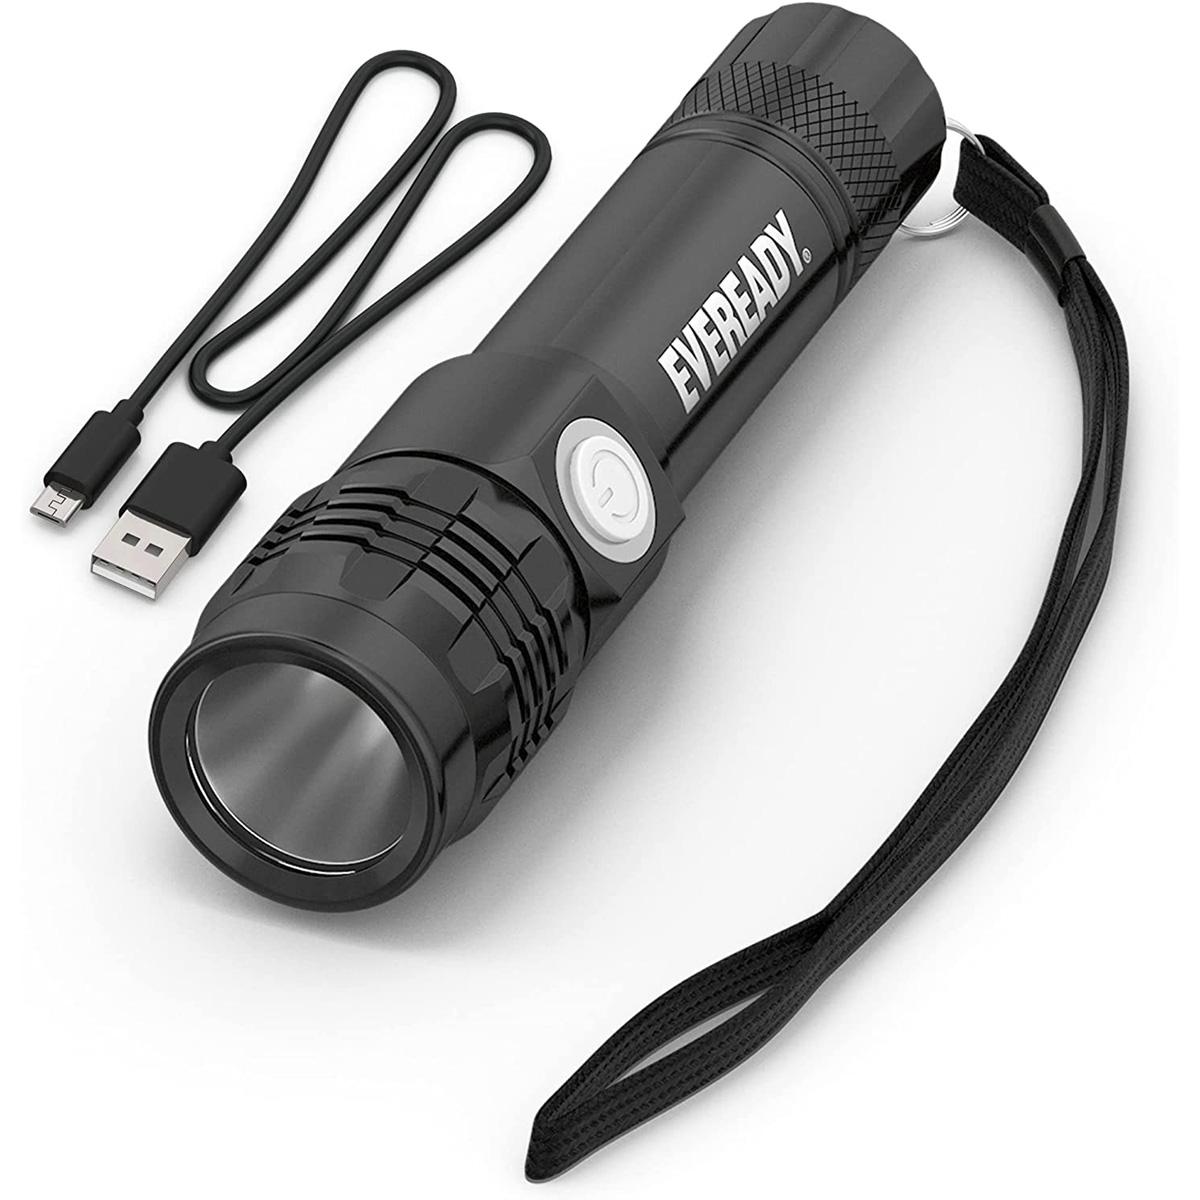 Eveready LED Rechargeable Tactical Flashlight for $8.34